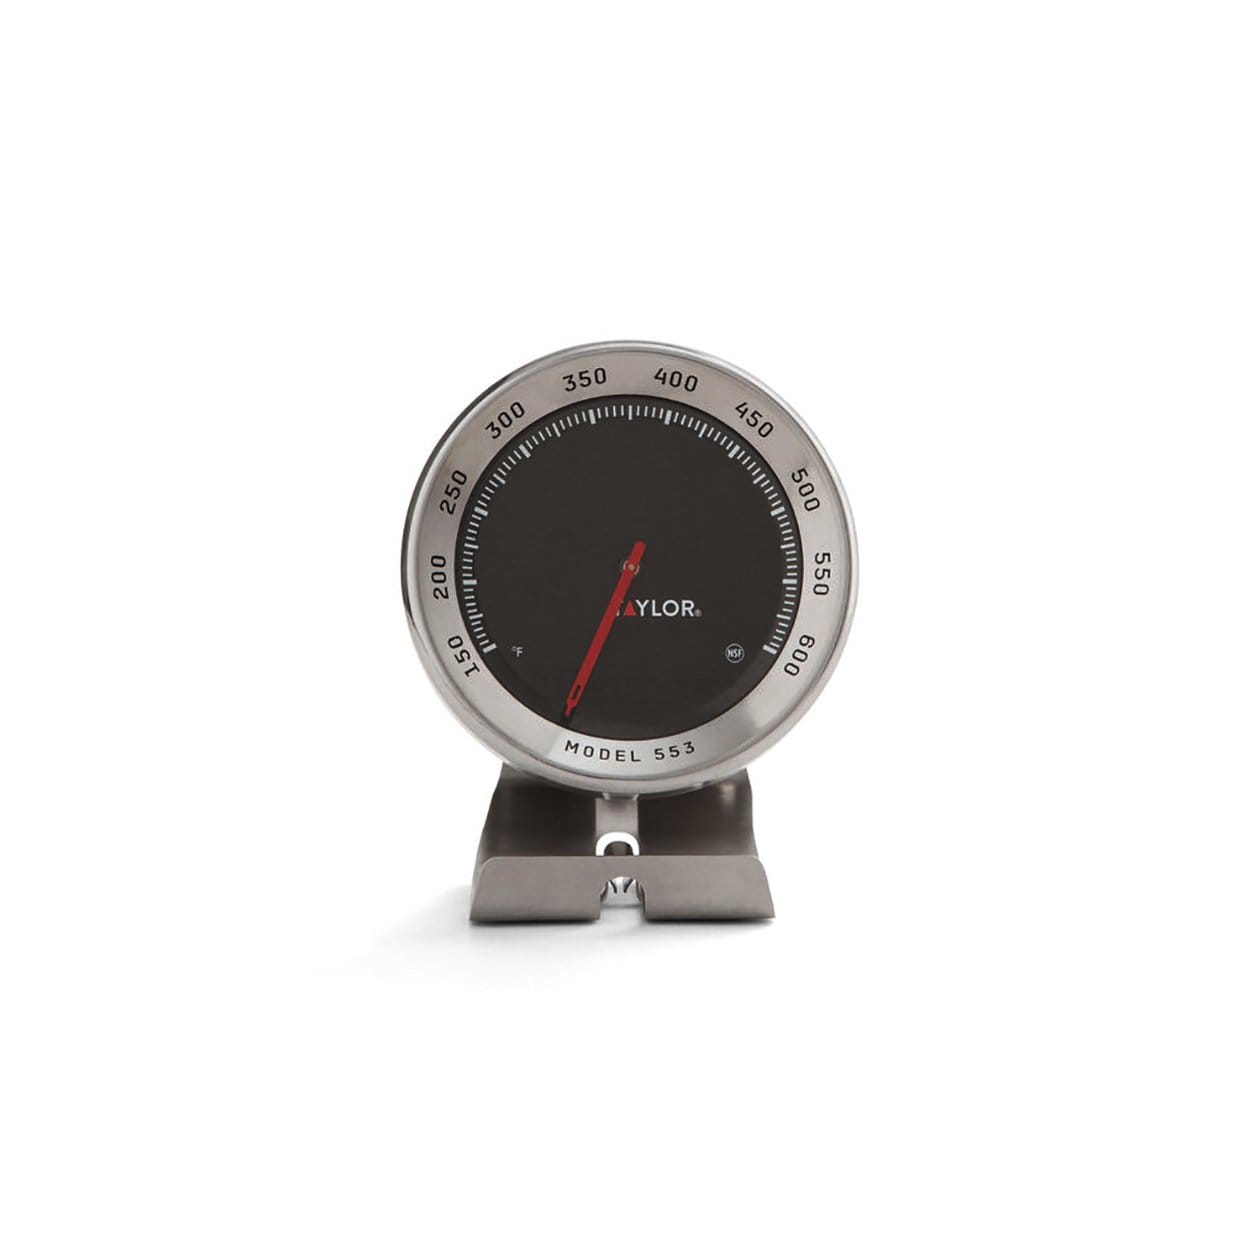 Taylor 3506 TruTemp Oven Thermometer Four Pack